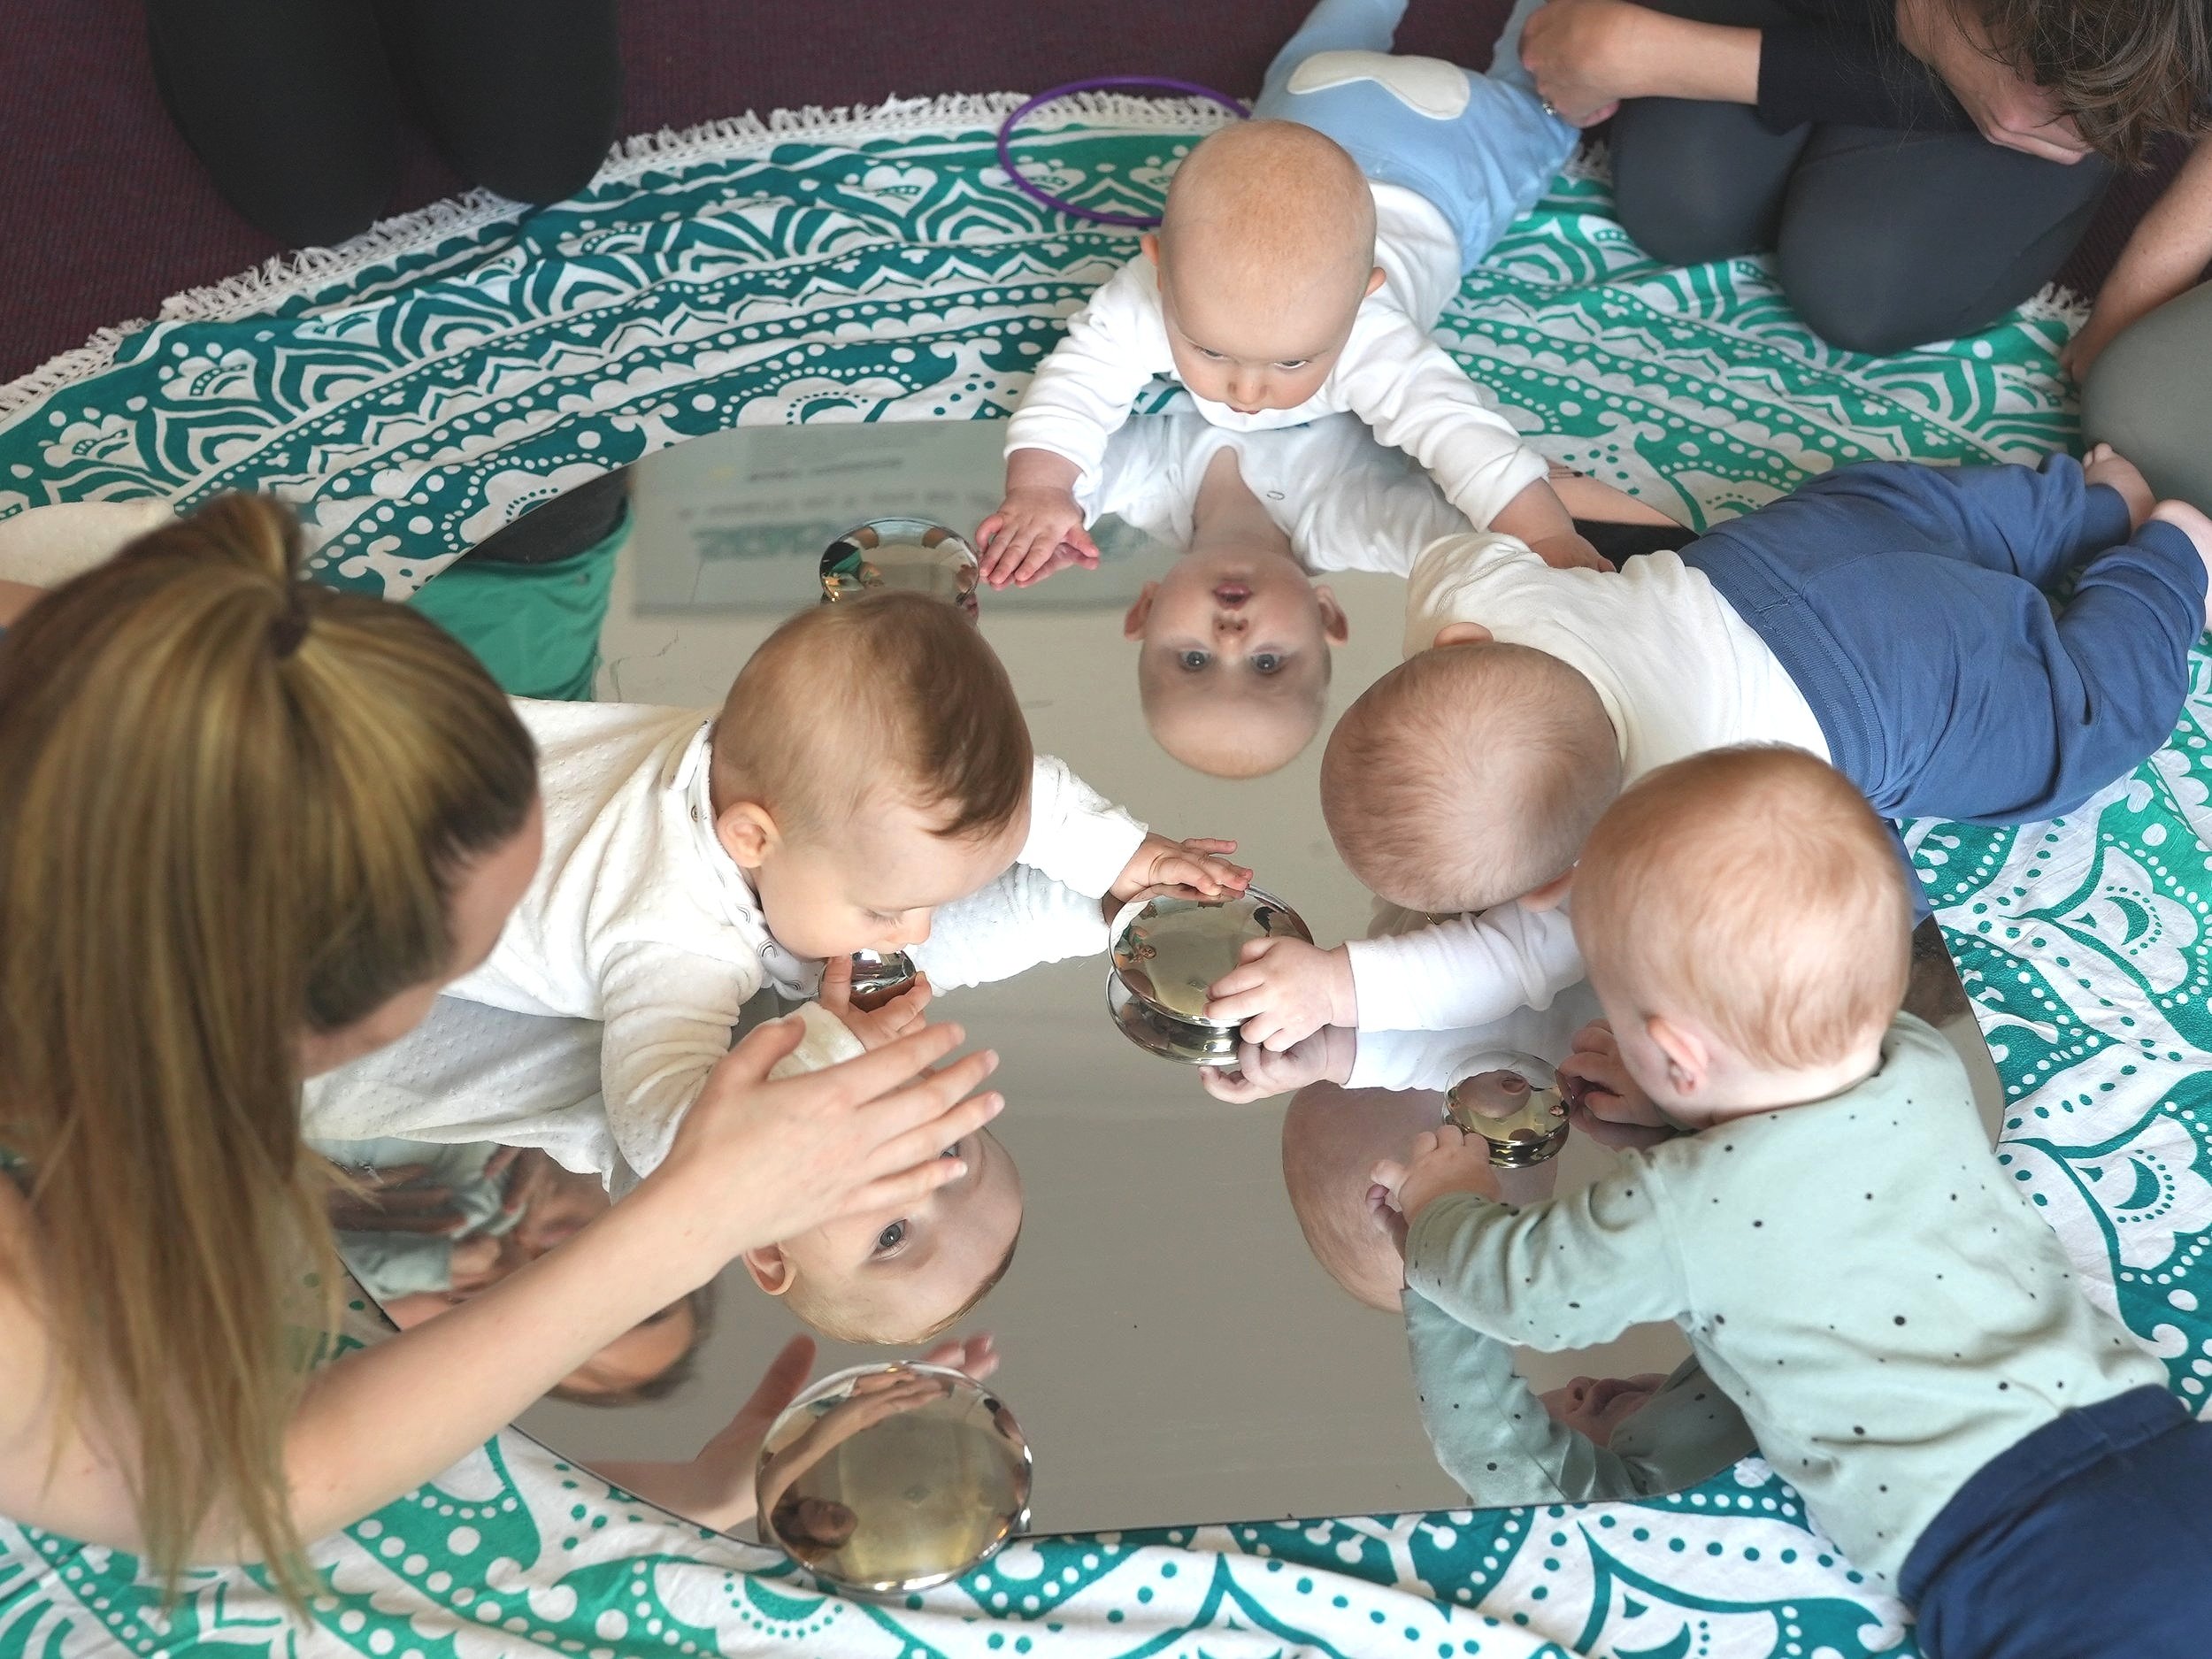  4 babies are laying on a mirror looking at themselves  